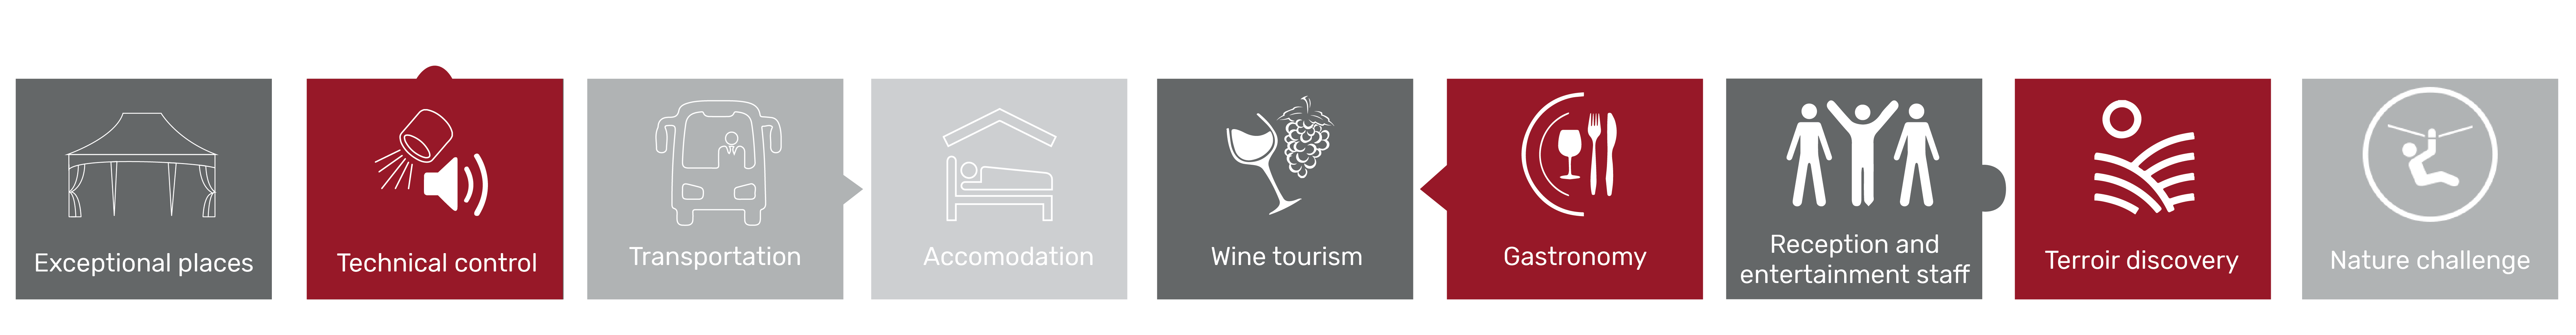 exceptional places, technical control, transportation, accommodation, wine tourism, gastronomy, challenge